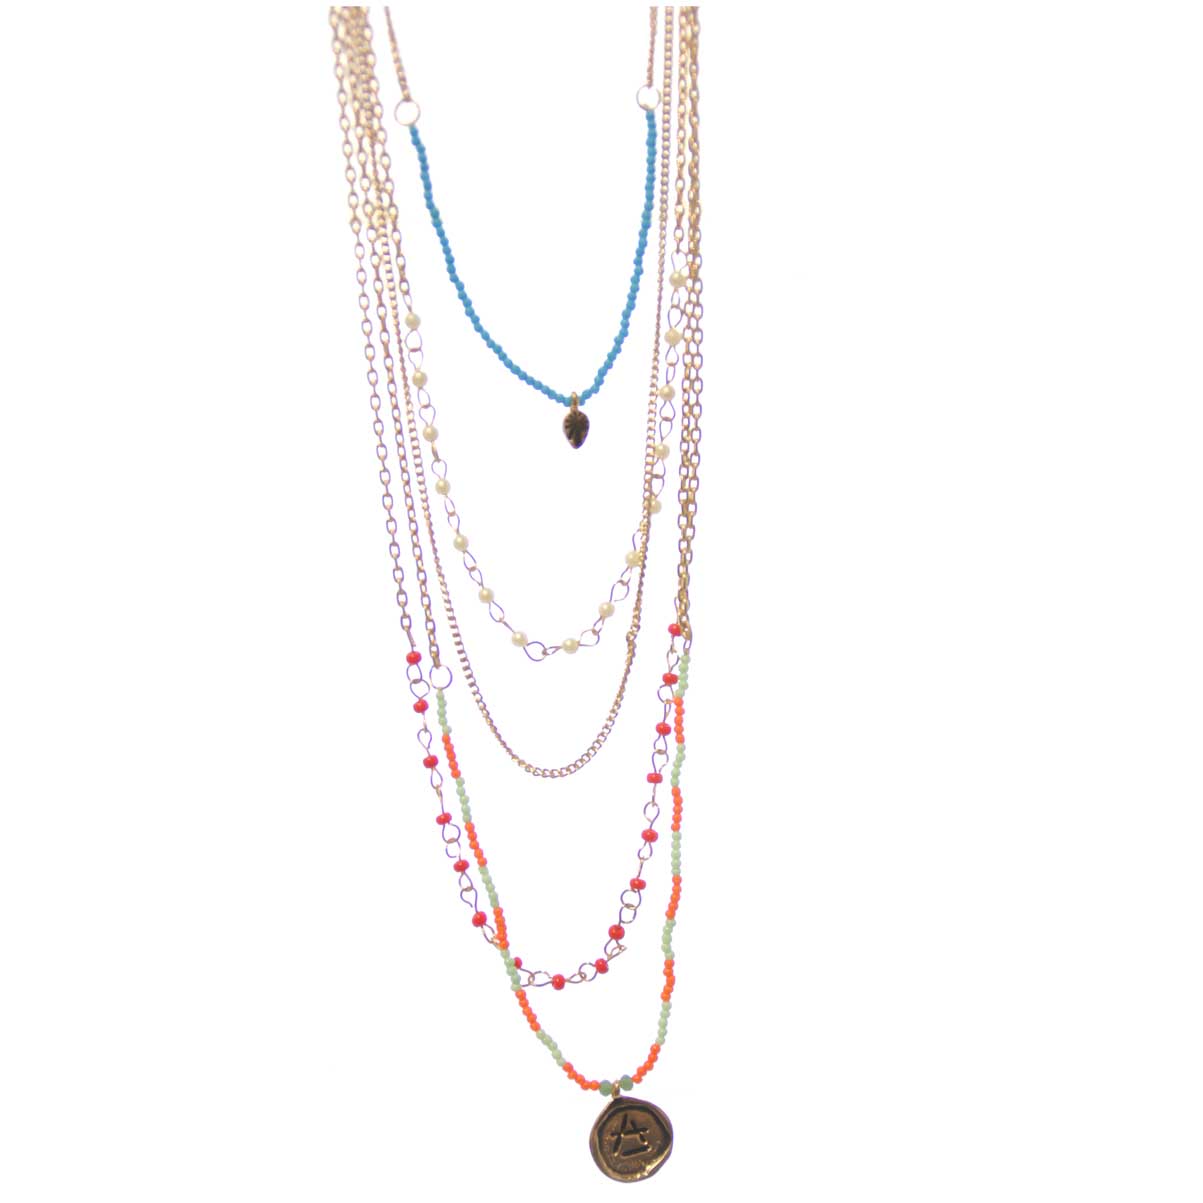 Charlie Paige Droplets of Tranquility Necklace